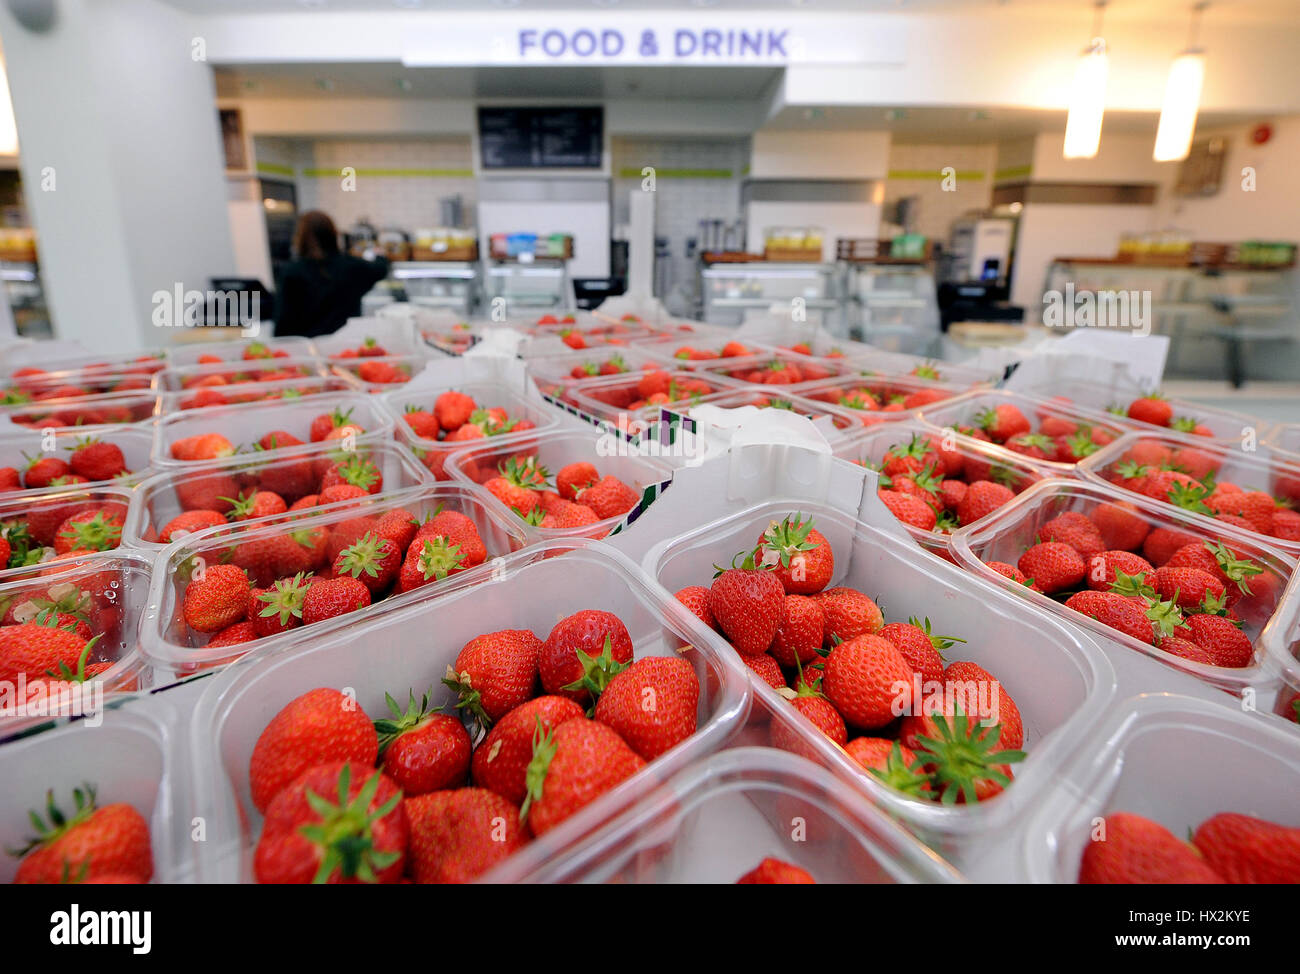 STRAWBERRIES GETTING DELIVERED THE WIMBLEDON THE WIMBLEDON CHAMPIONSHIPS 20 THE ALL ENGLAND TENNIS CLUB WIMBLEDON LONDON ENGL Stock Photo